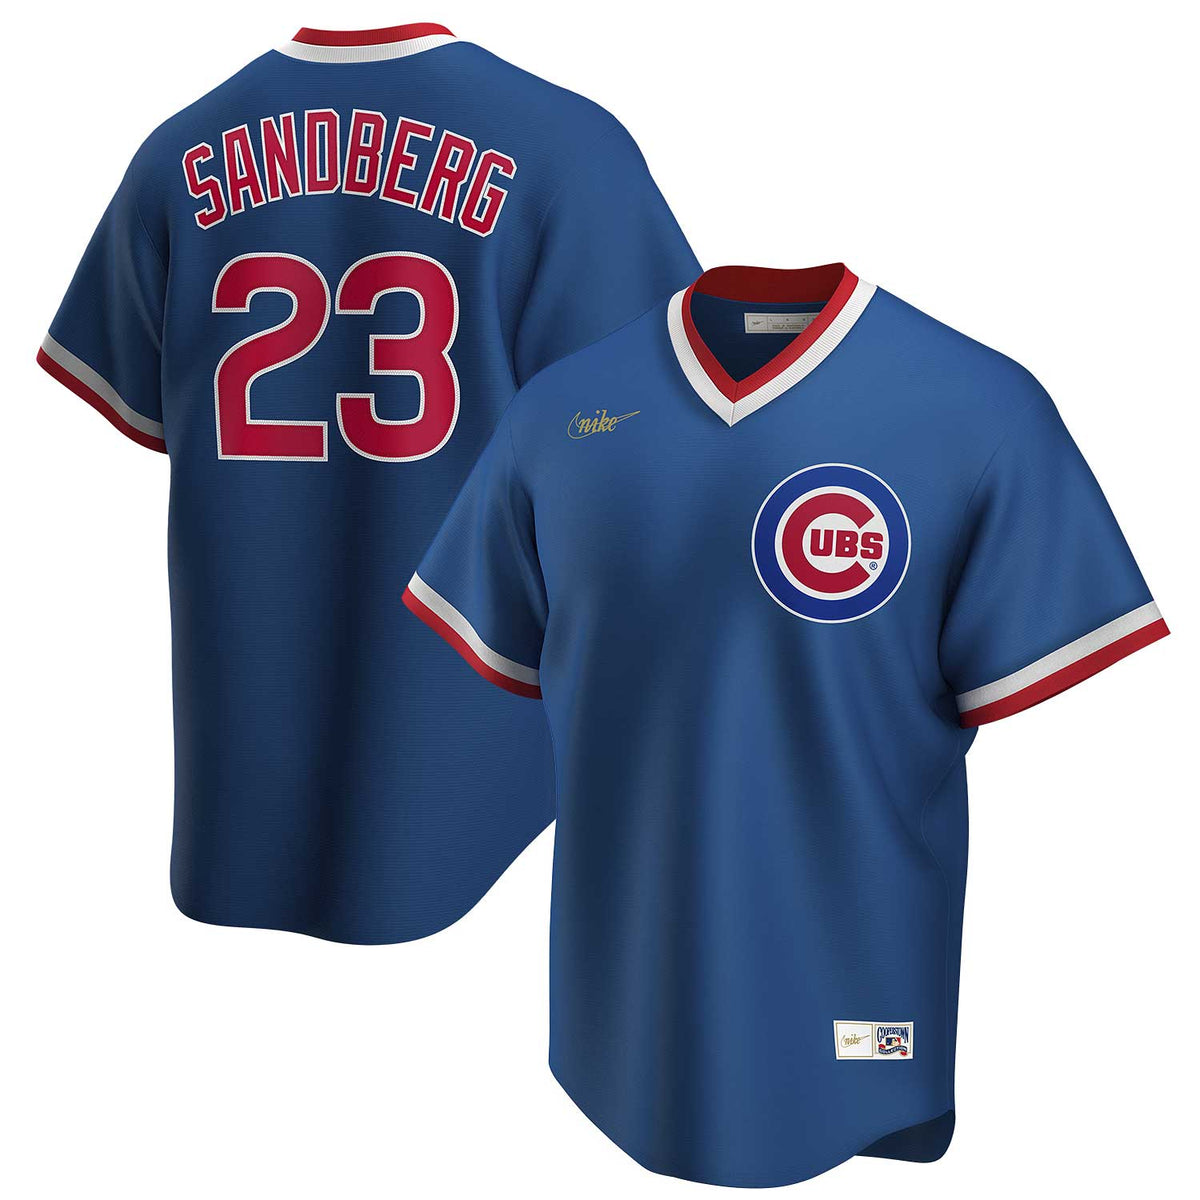 Cubs Sandberg '84 Jersey for Sale in Houston, TX - OfferUp